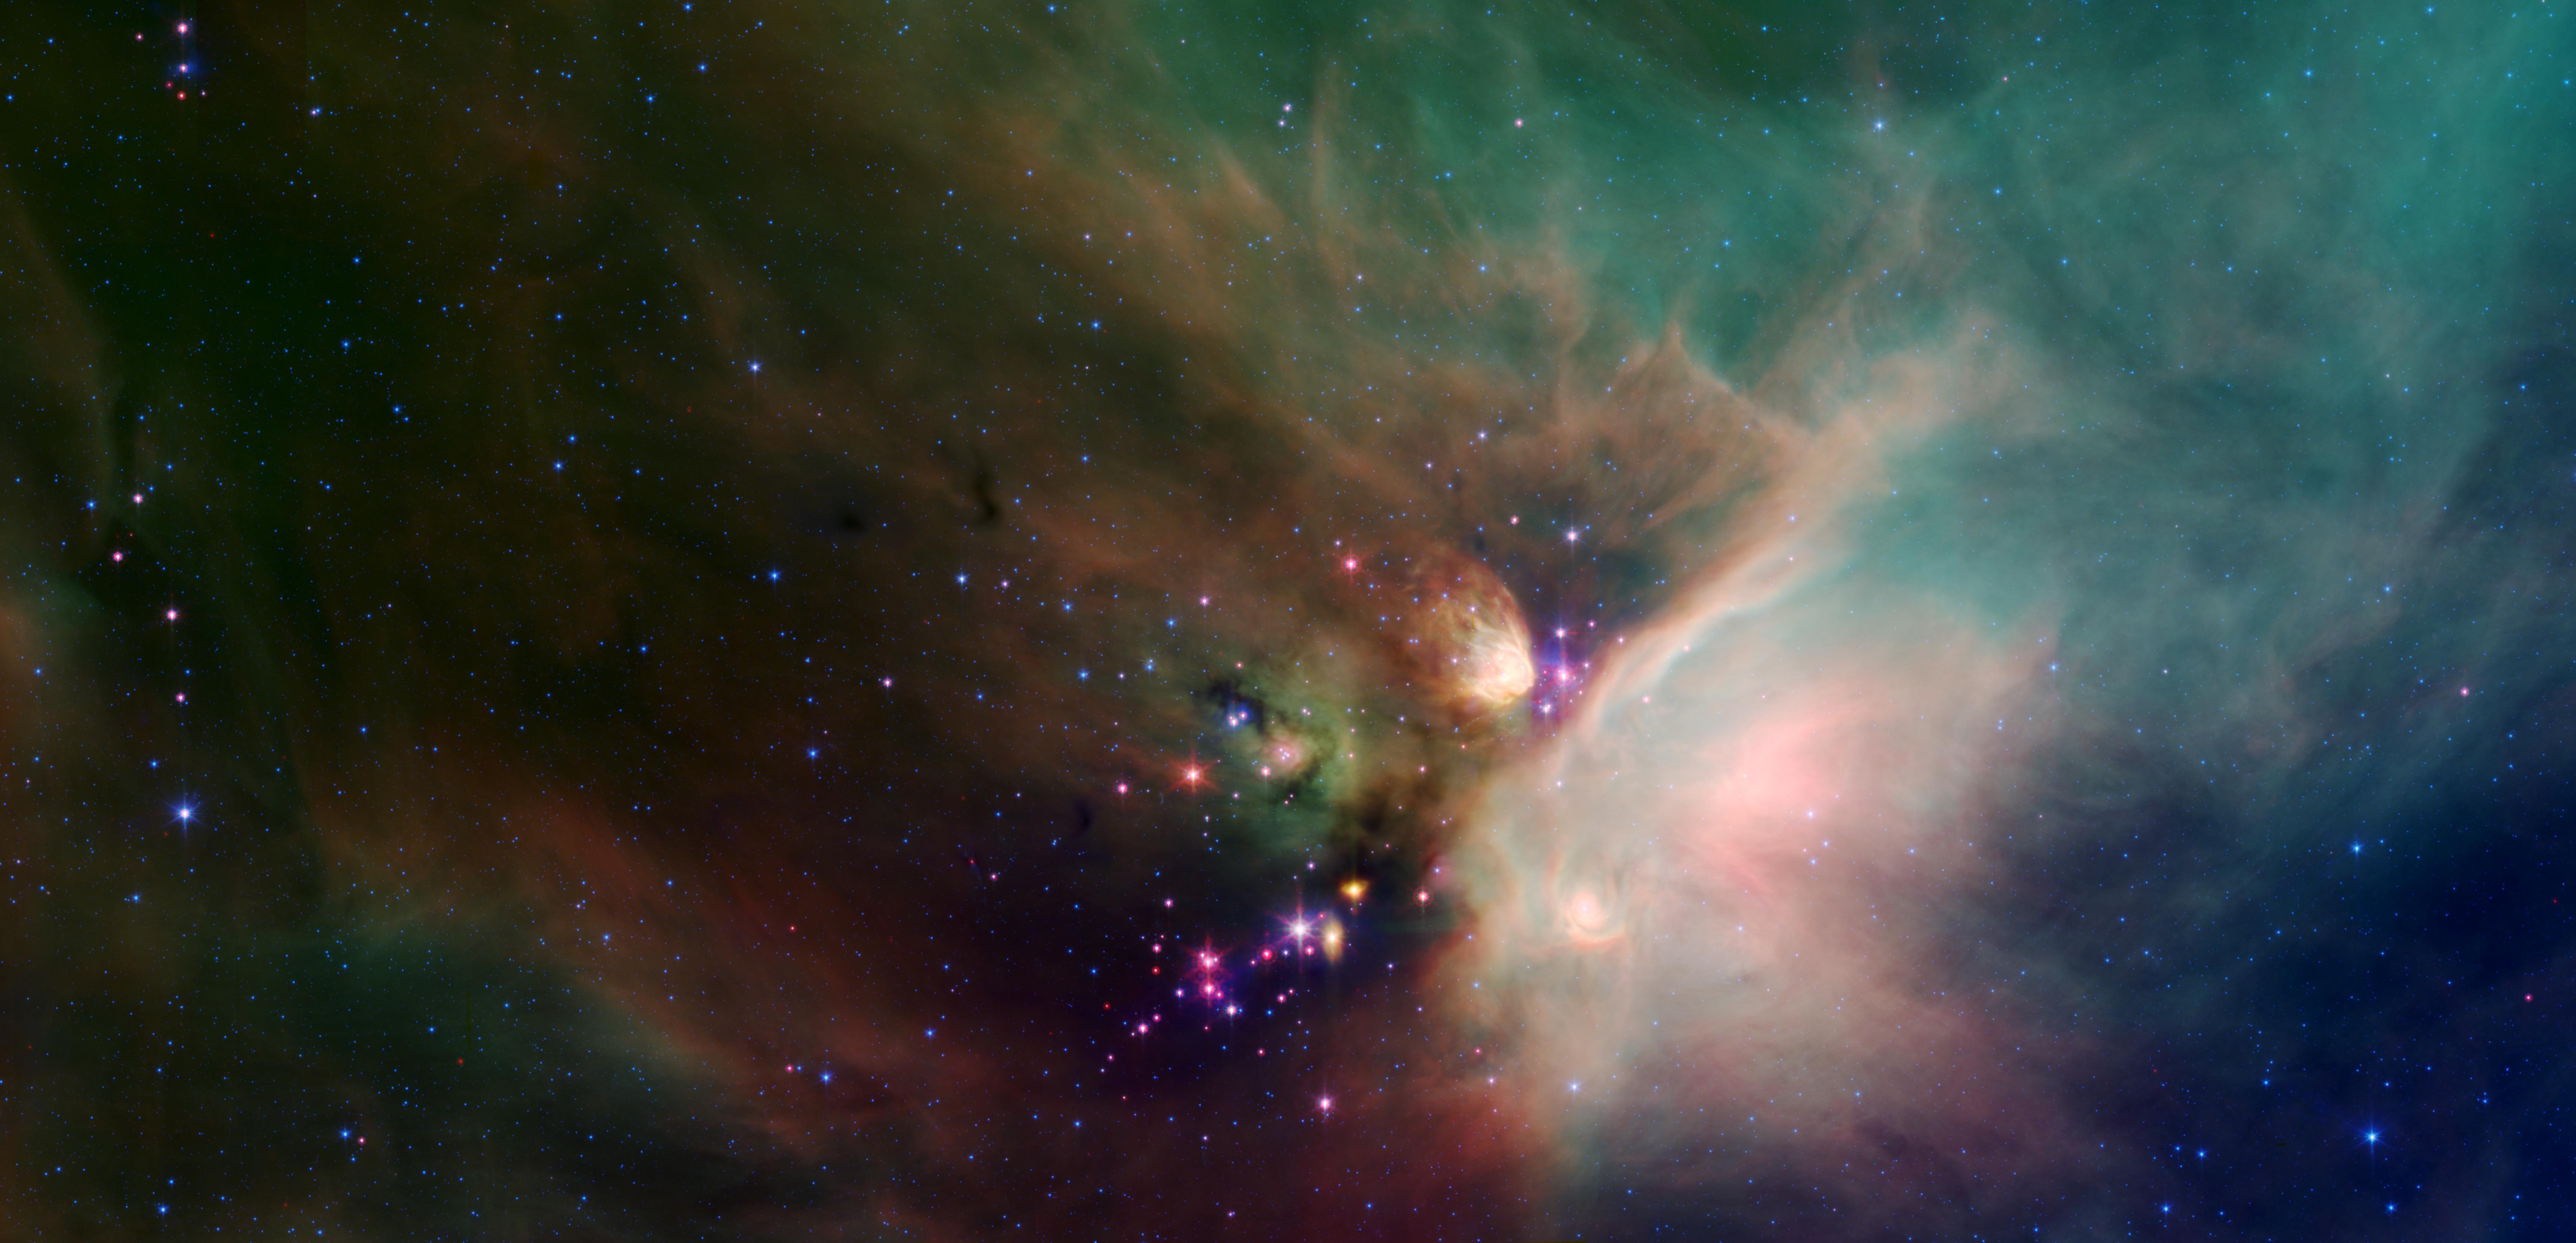 A blanket of green- and orange-colored stellar dust surrounds a grouping of purple, blue and red stars.